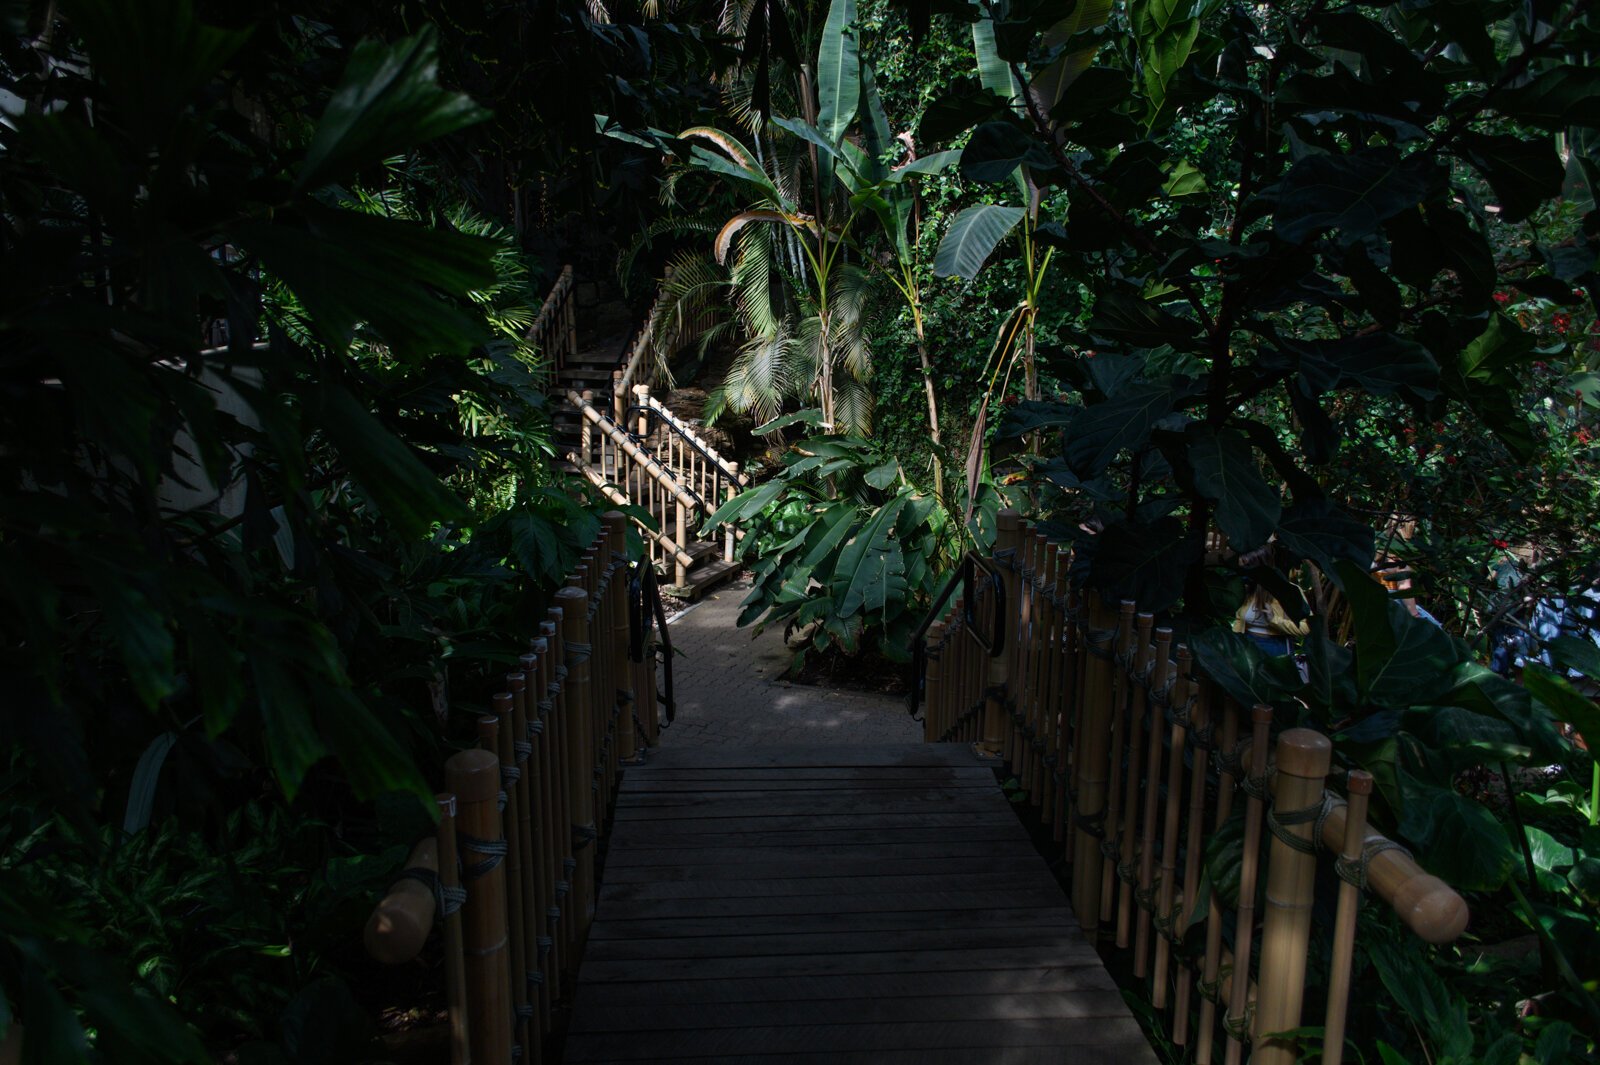 The Botanical Conservatory has three indoor gardens, which cover over 25,000 square feet and showcase 1,200 plants (over 500 species) and 72 different types of cacti.